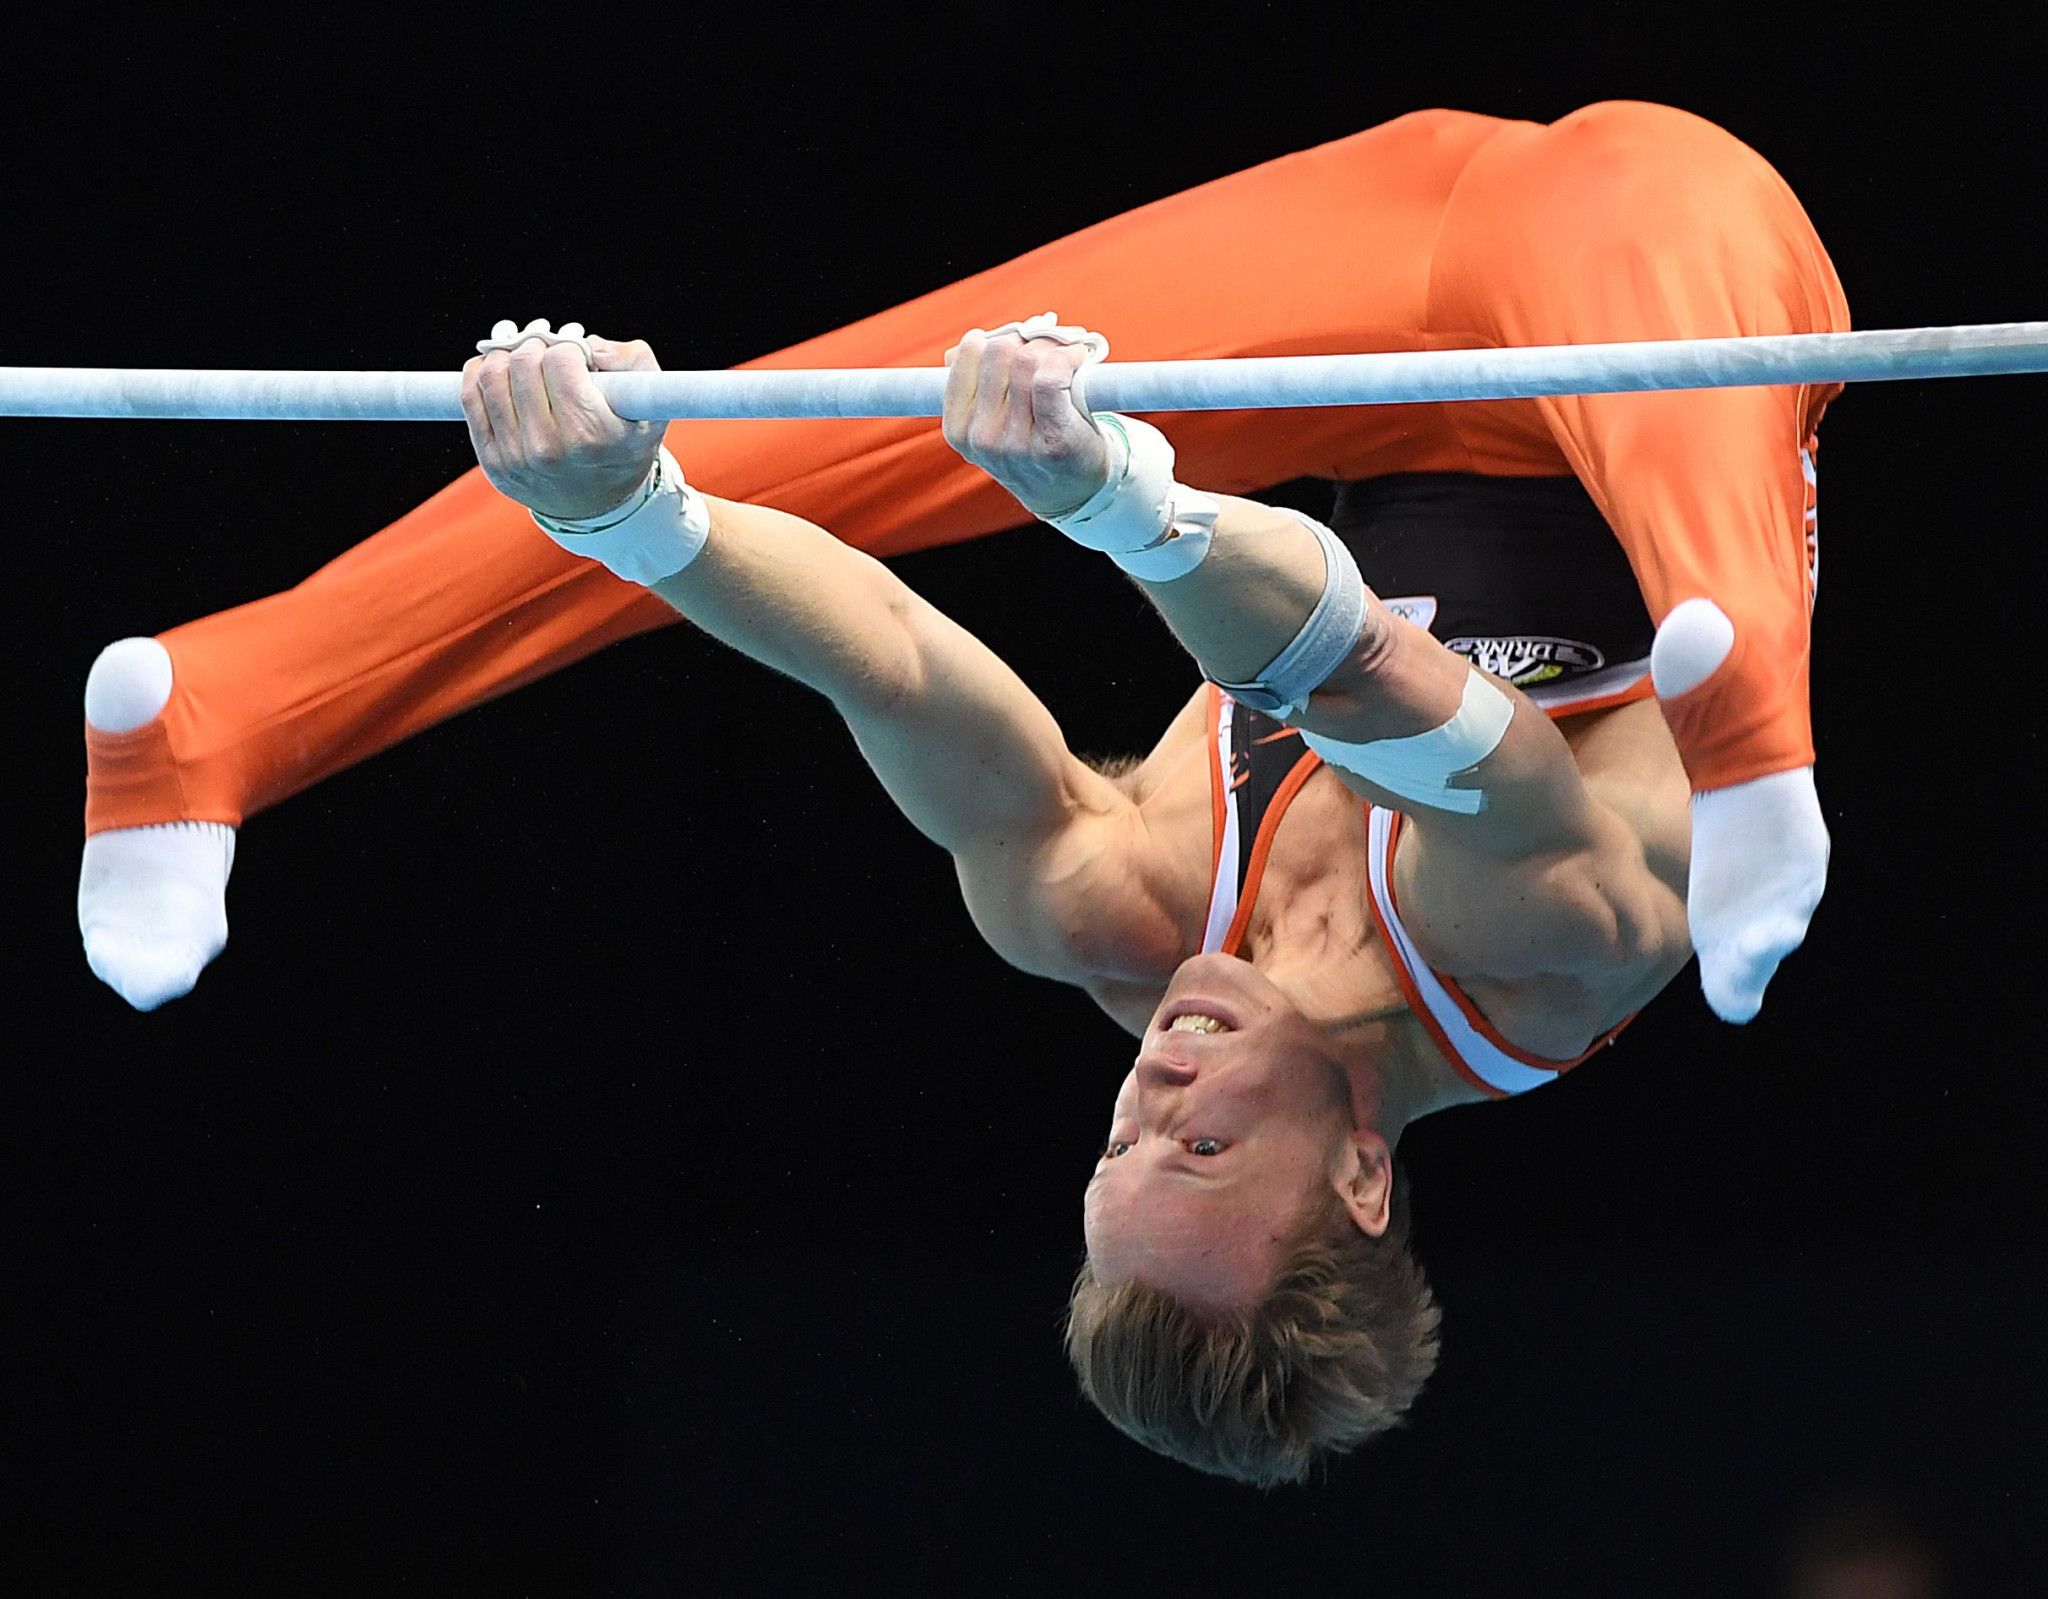 The Netherlands' Epke Zonderland is among the leading athletes set to compete at this week’s FIG World Cup in Melbourne ©Getty Images